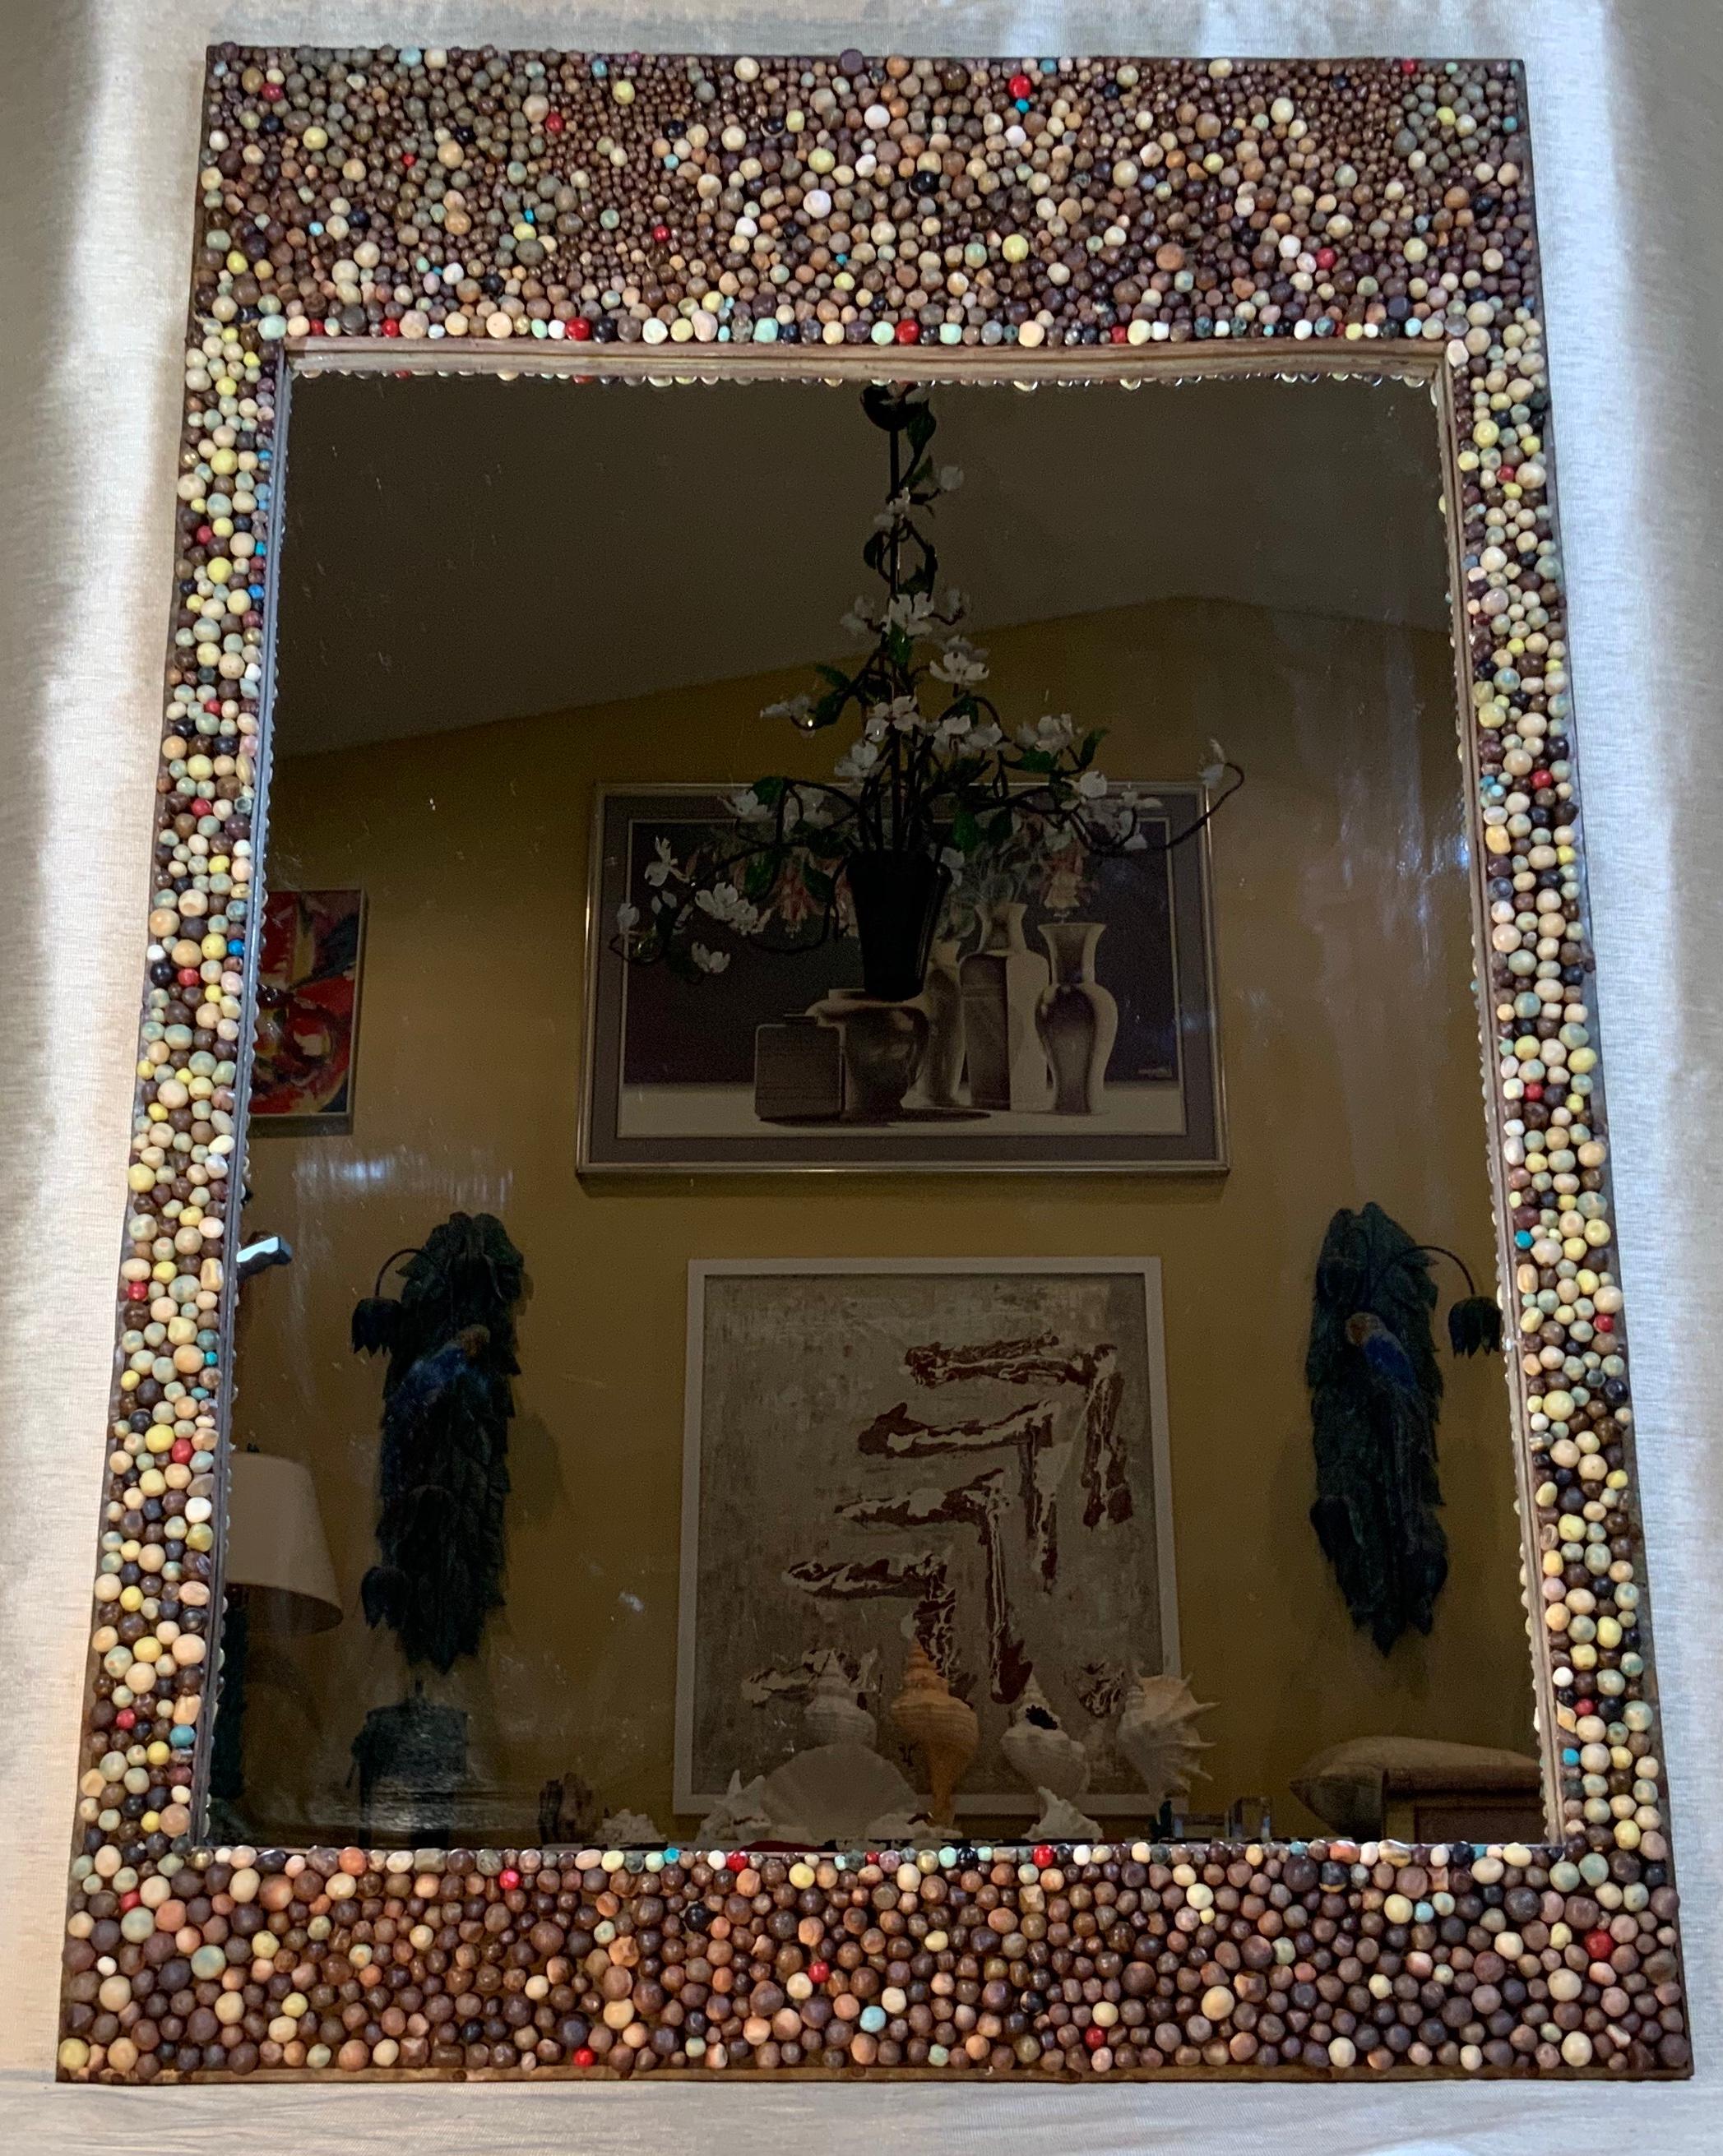 Funky wall mirror artistically made of wood frame cover with copper mash and hundreds of individually handmade and painted ceramic balls imbedded on the copper mash, that’s included some small brass elements in round shape. All together to make